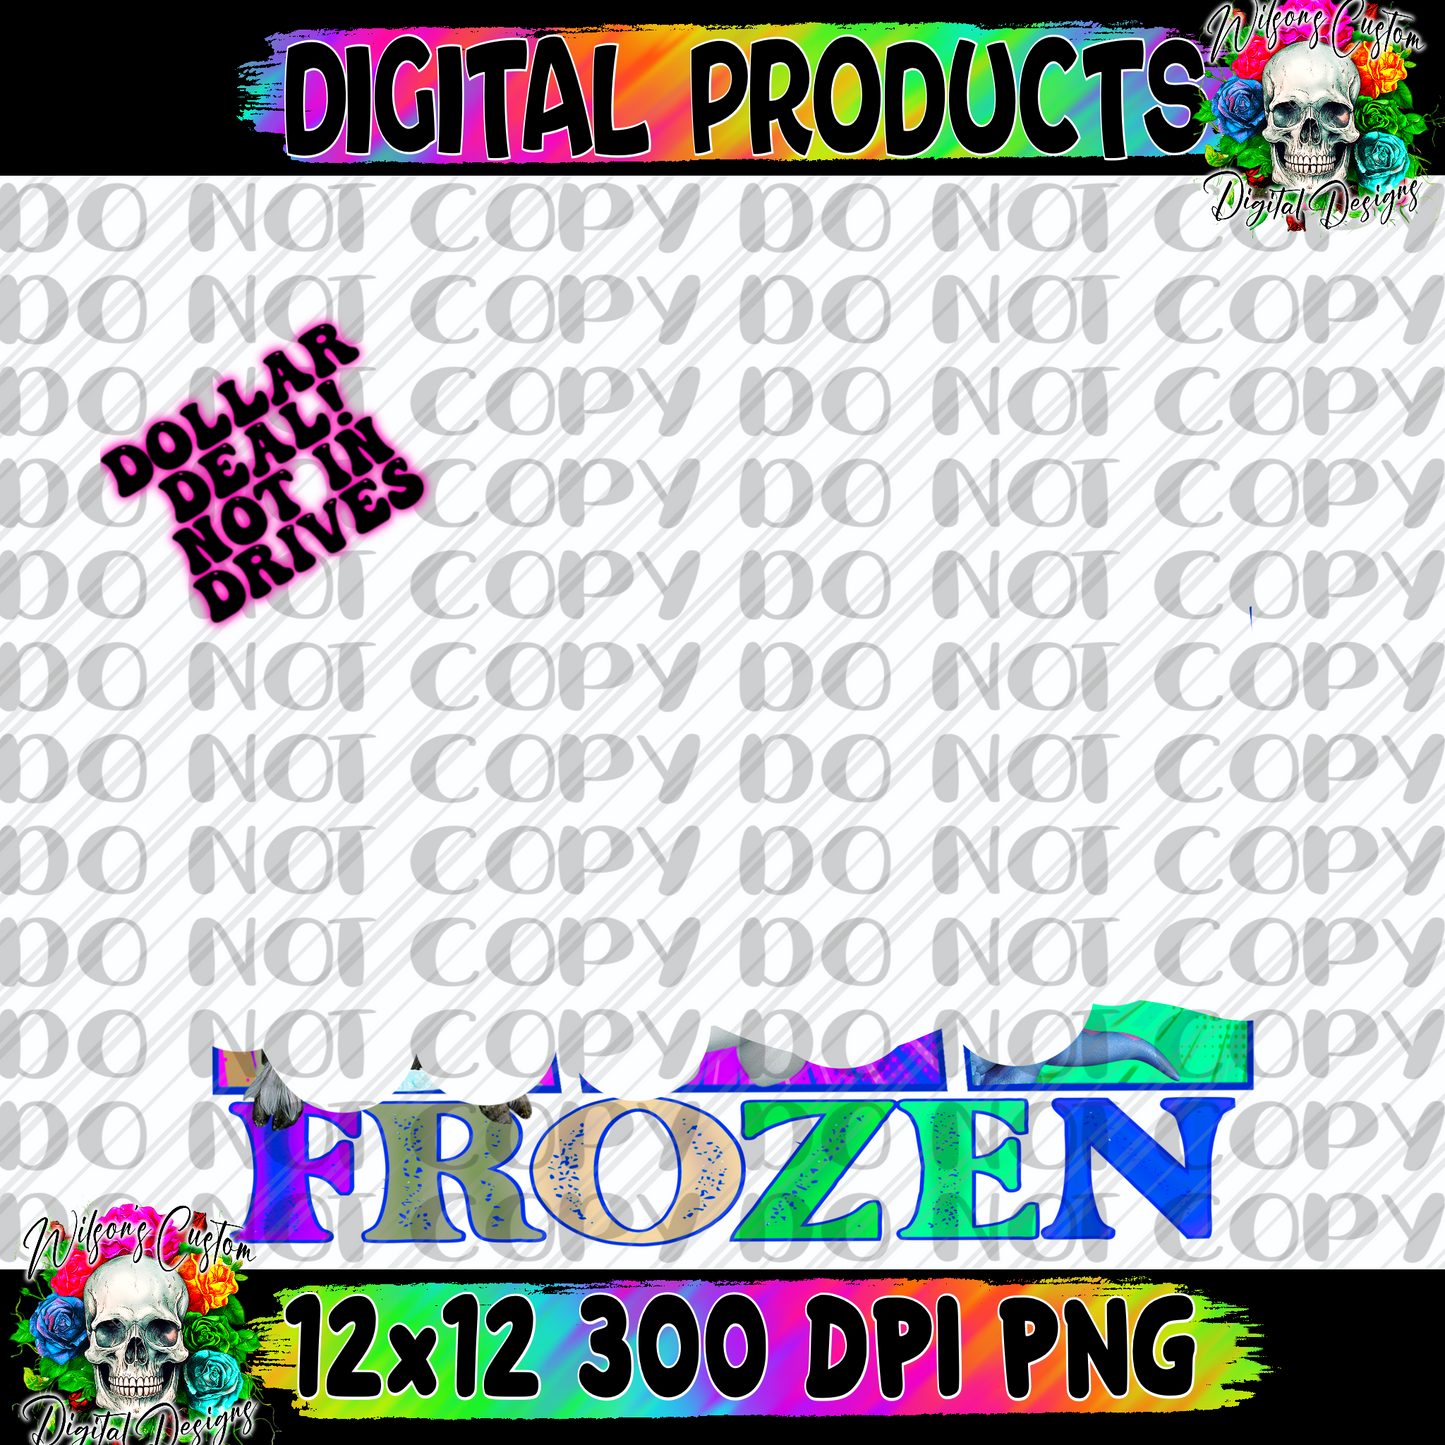 Froze collage